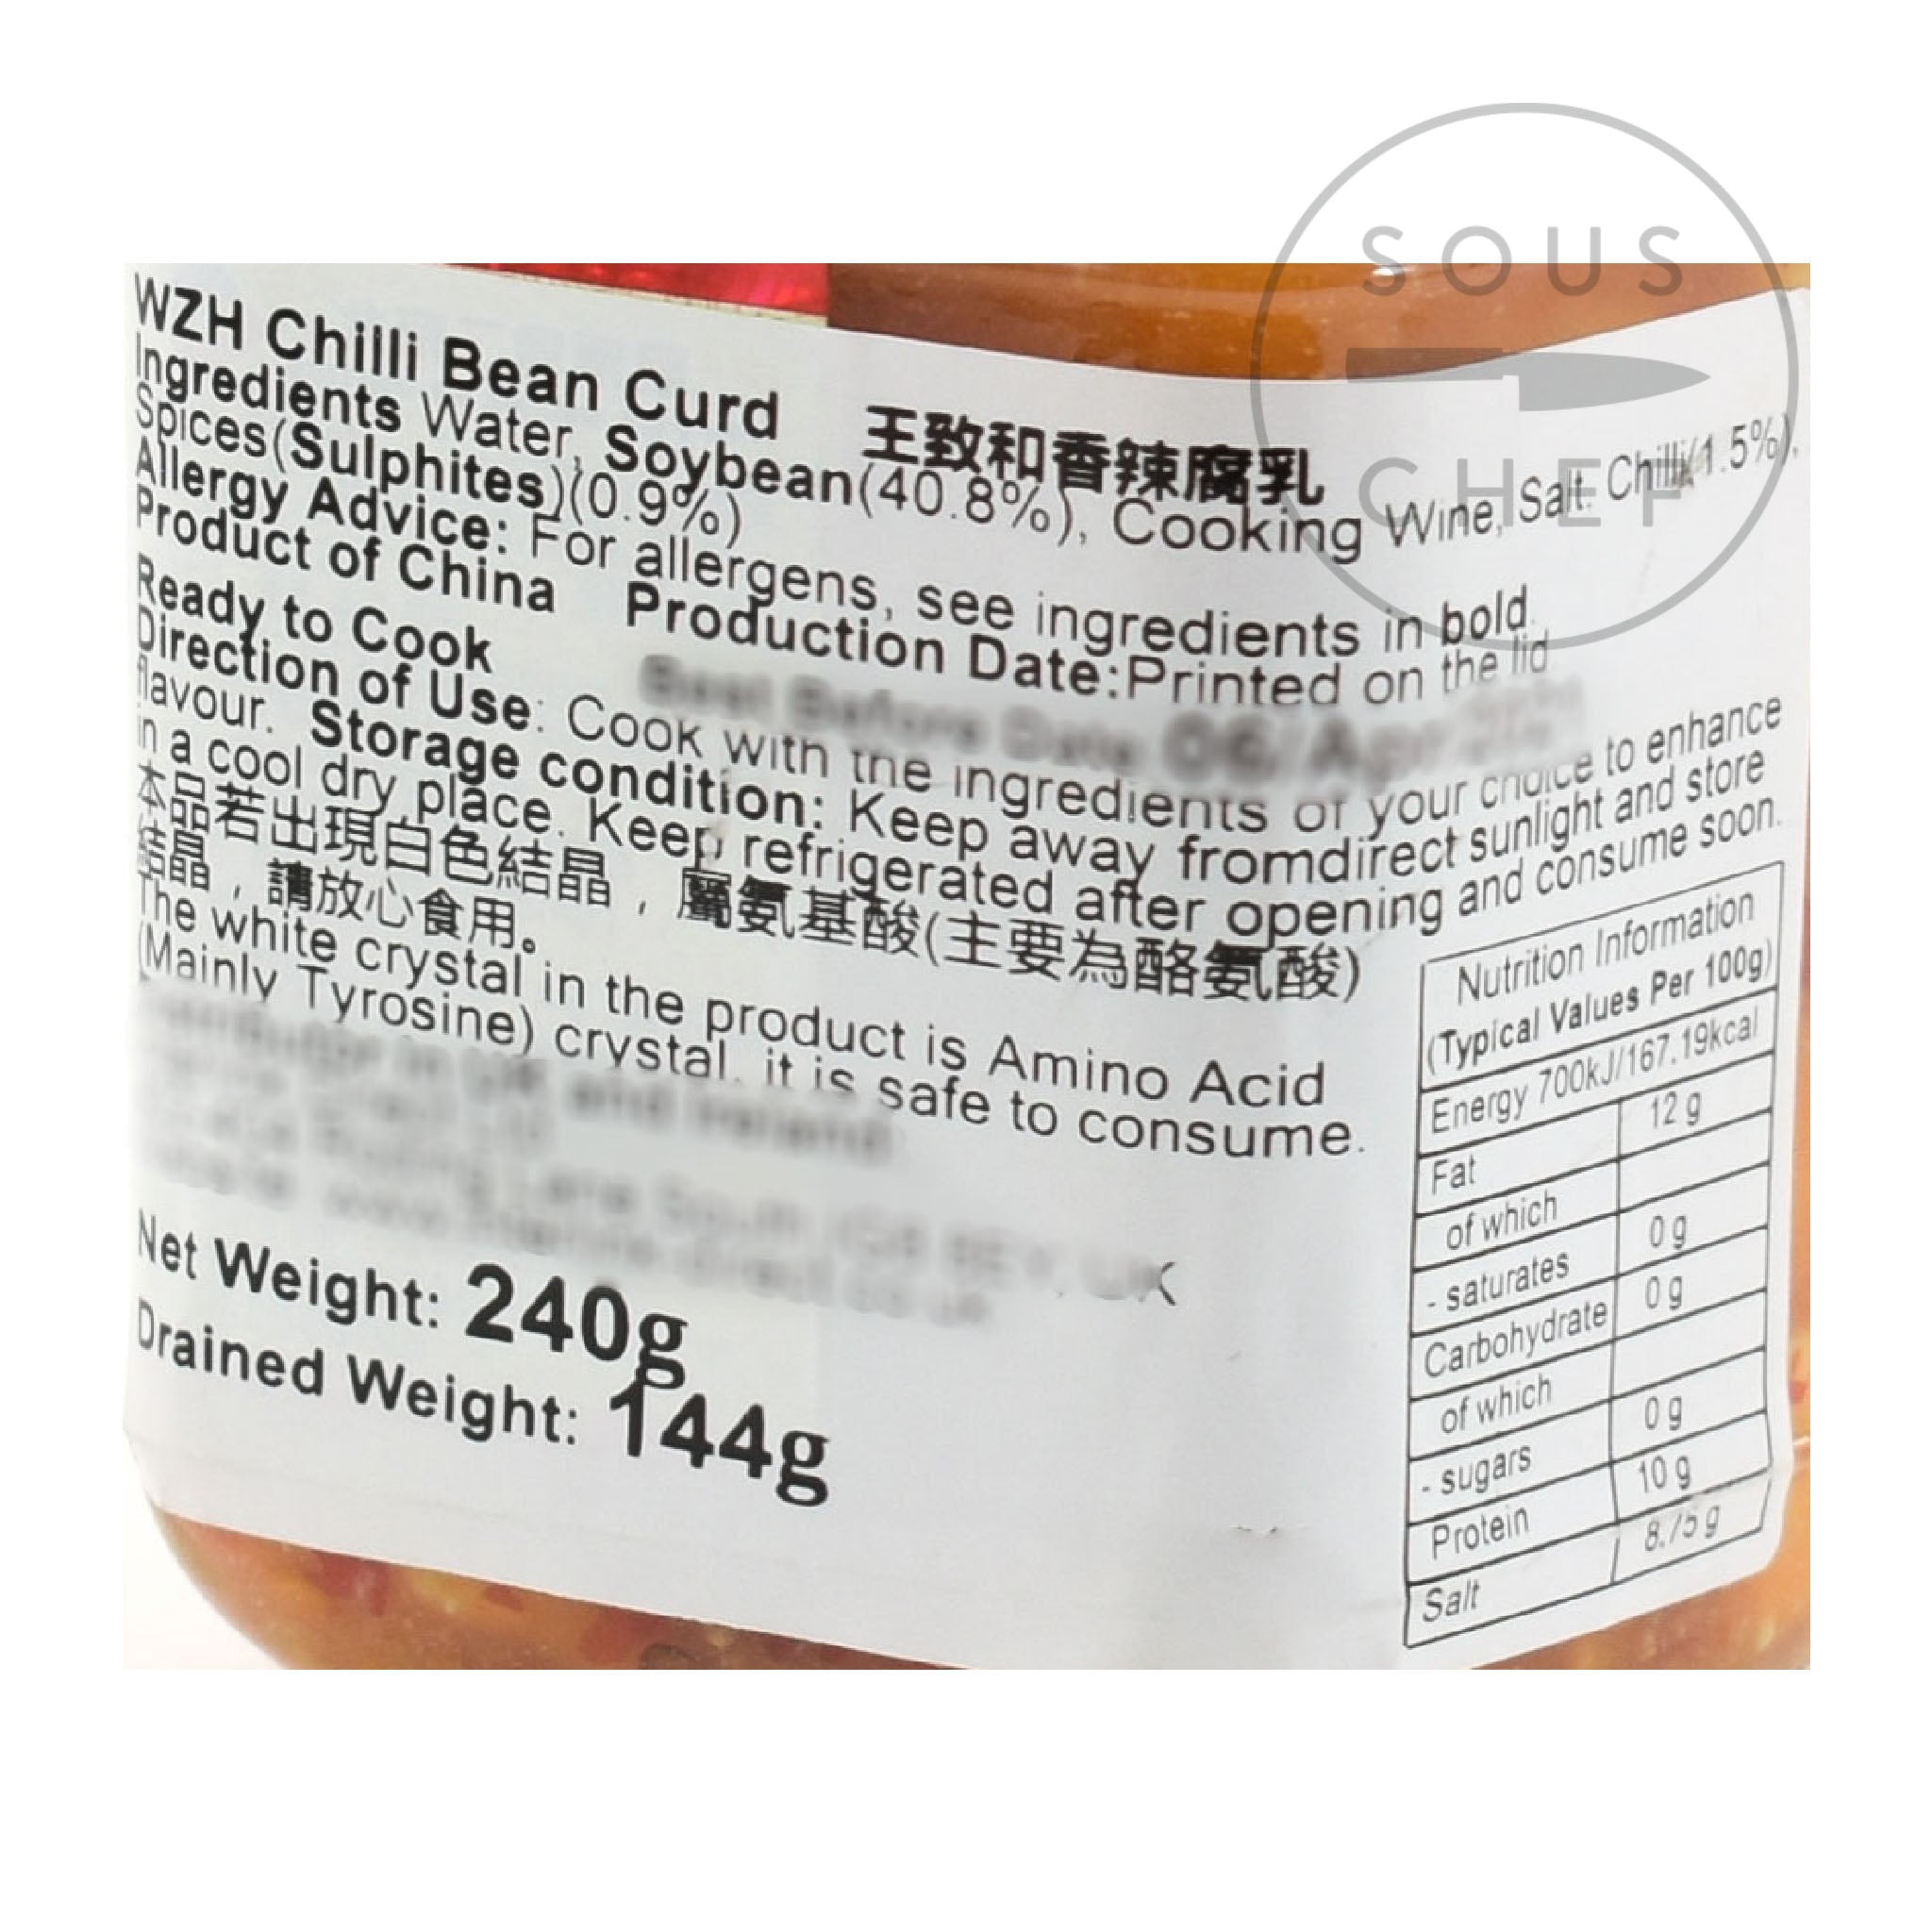 Fermented Bean Curd with Chilli 240g nutritional information ingredients